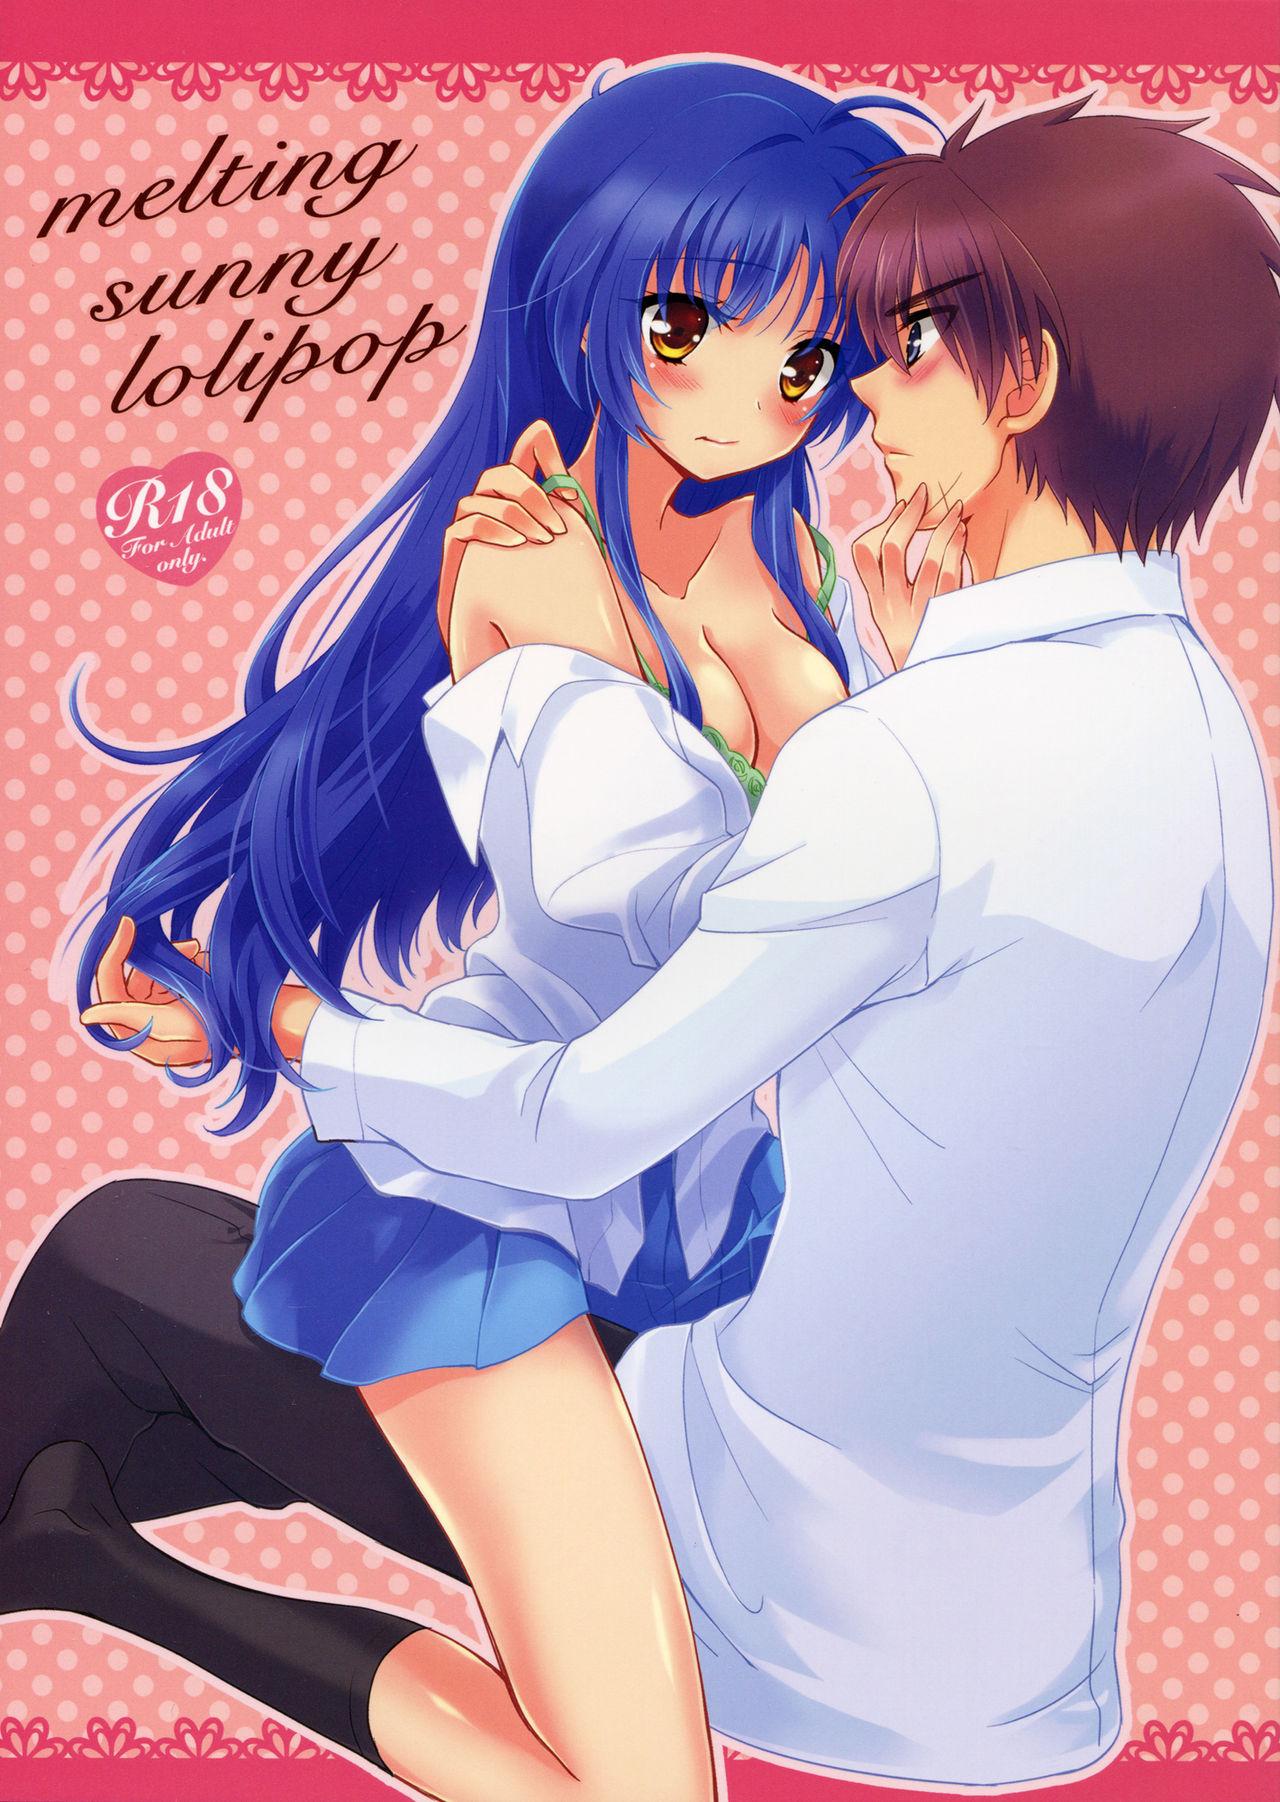 Hot Mom Melting Sunny Lolipop - Full metal panic Lady - Picture 1